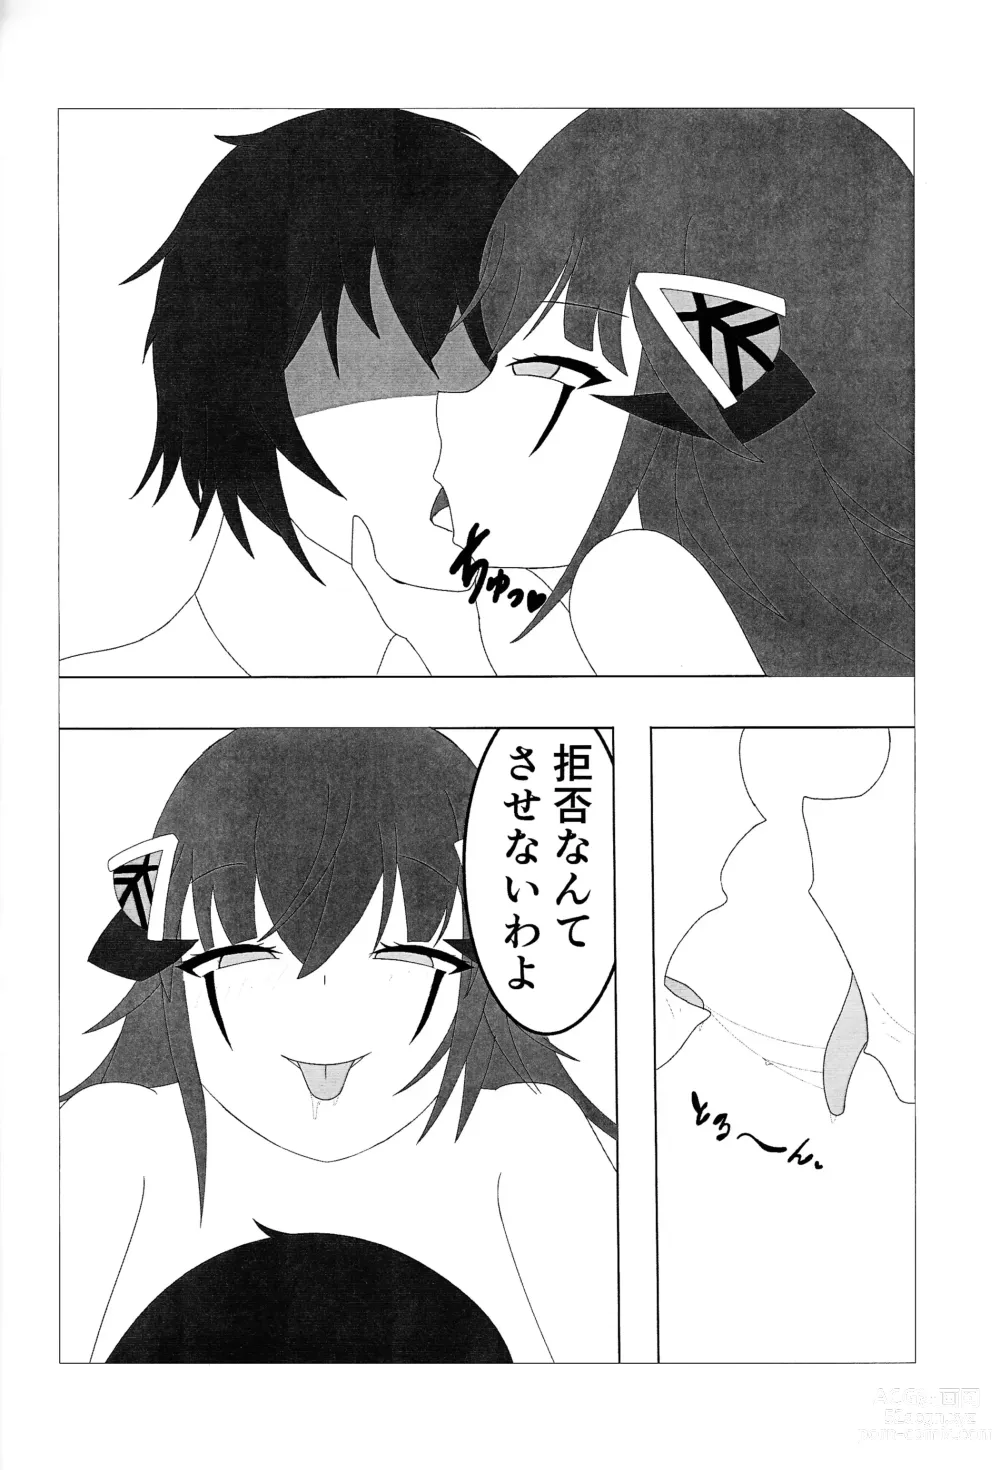 Page 5 of doujinshi FLAMES OF THIS AFFECTION